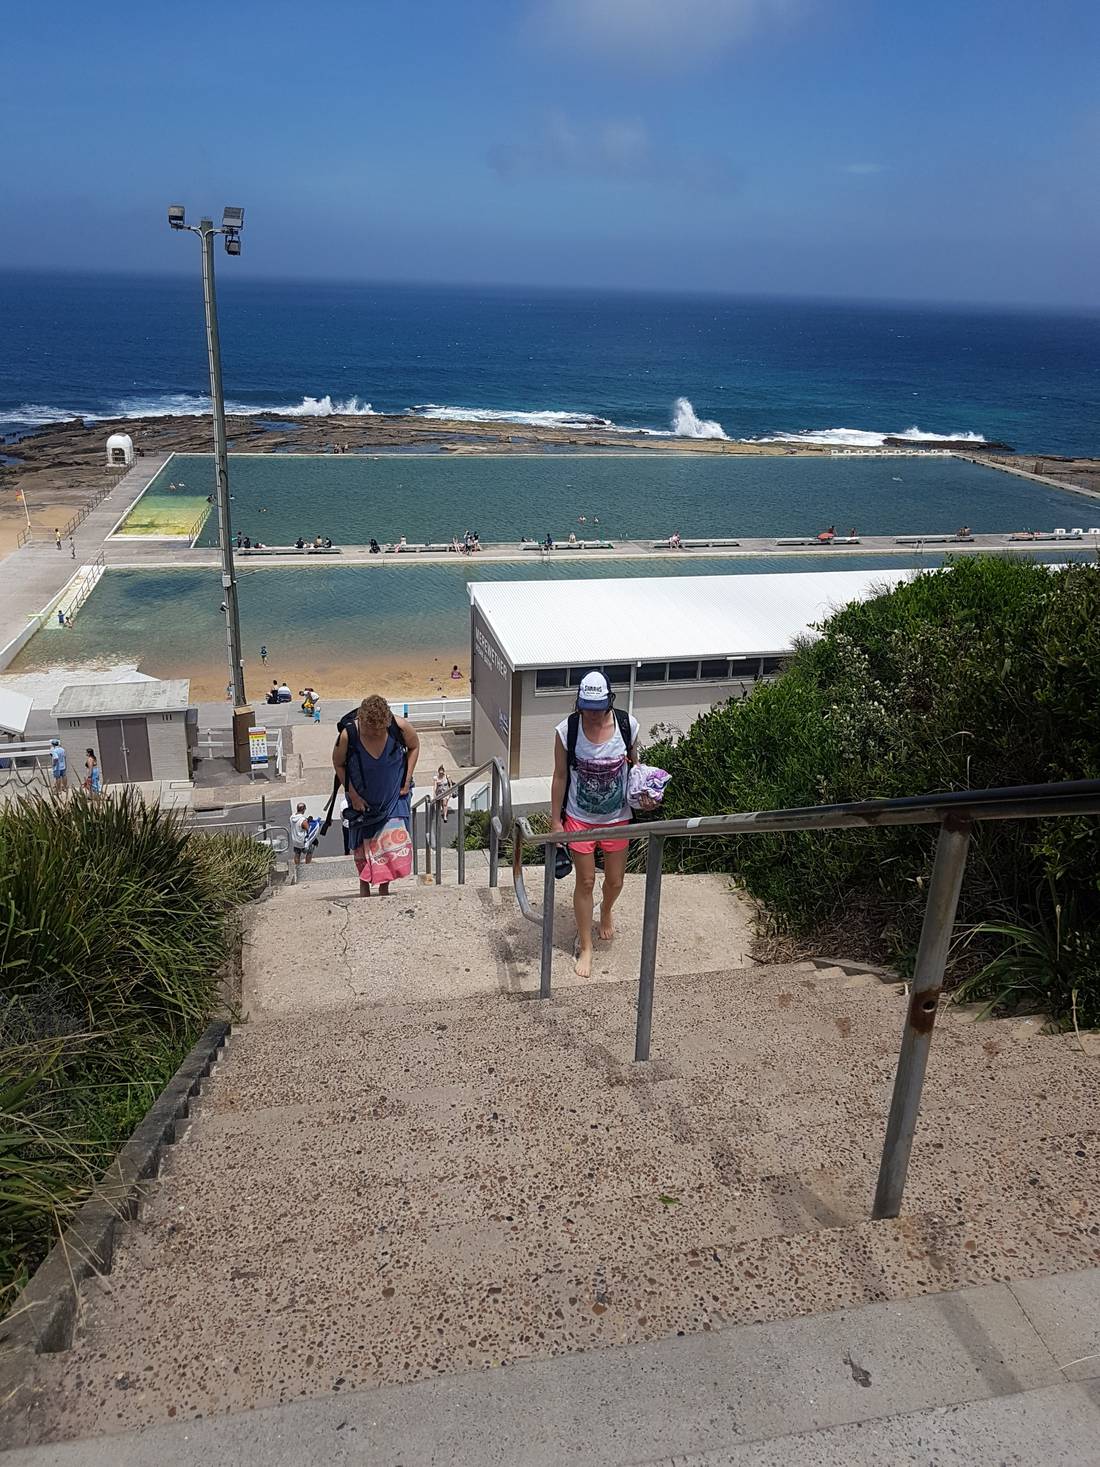 Then we cooled off at the Merewether Baths, a free, public, saltwater pool. These were the steep, long steps we had to walk up to get back to the car.